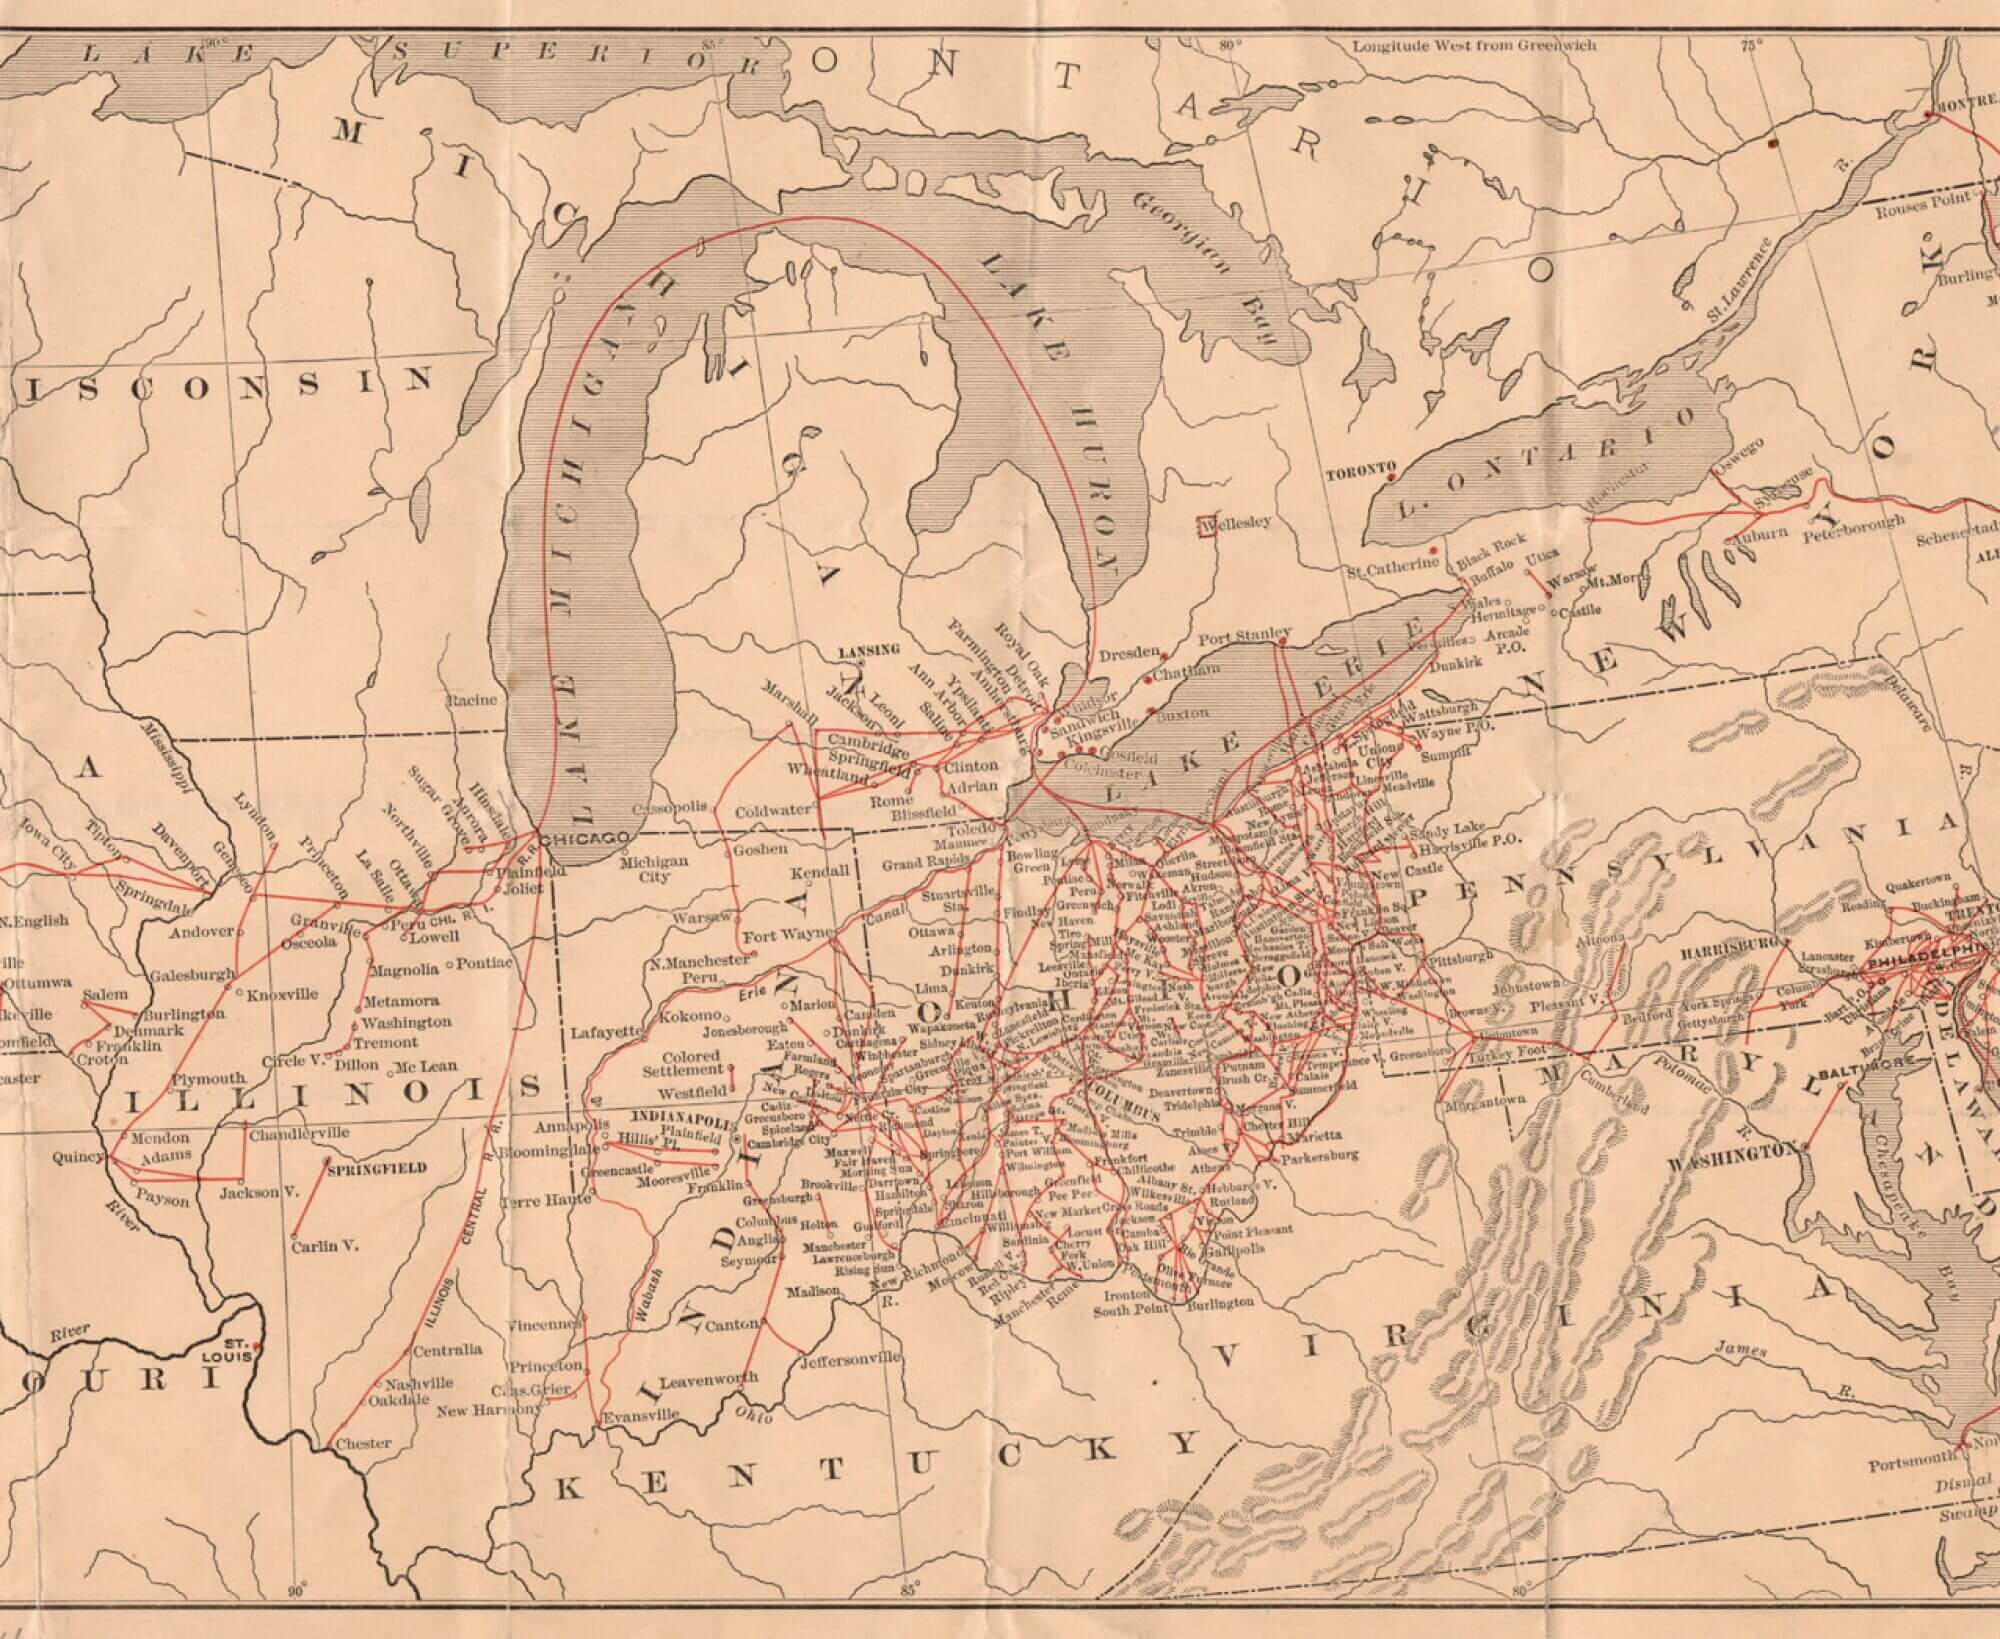 A Map titled ““UNDERGROUND” Routes To Canada, Showing The Lines Of Travel Of Fugitive Slaves, W. H. Siebert 1896”. This map shows the routes used by freedom seekers travelling from the Northeastern and Midwestern United States to Ontario, Canada, via various ports leading to the Great Lakes.